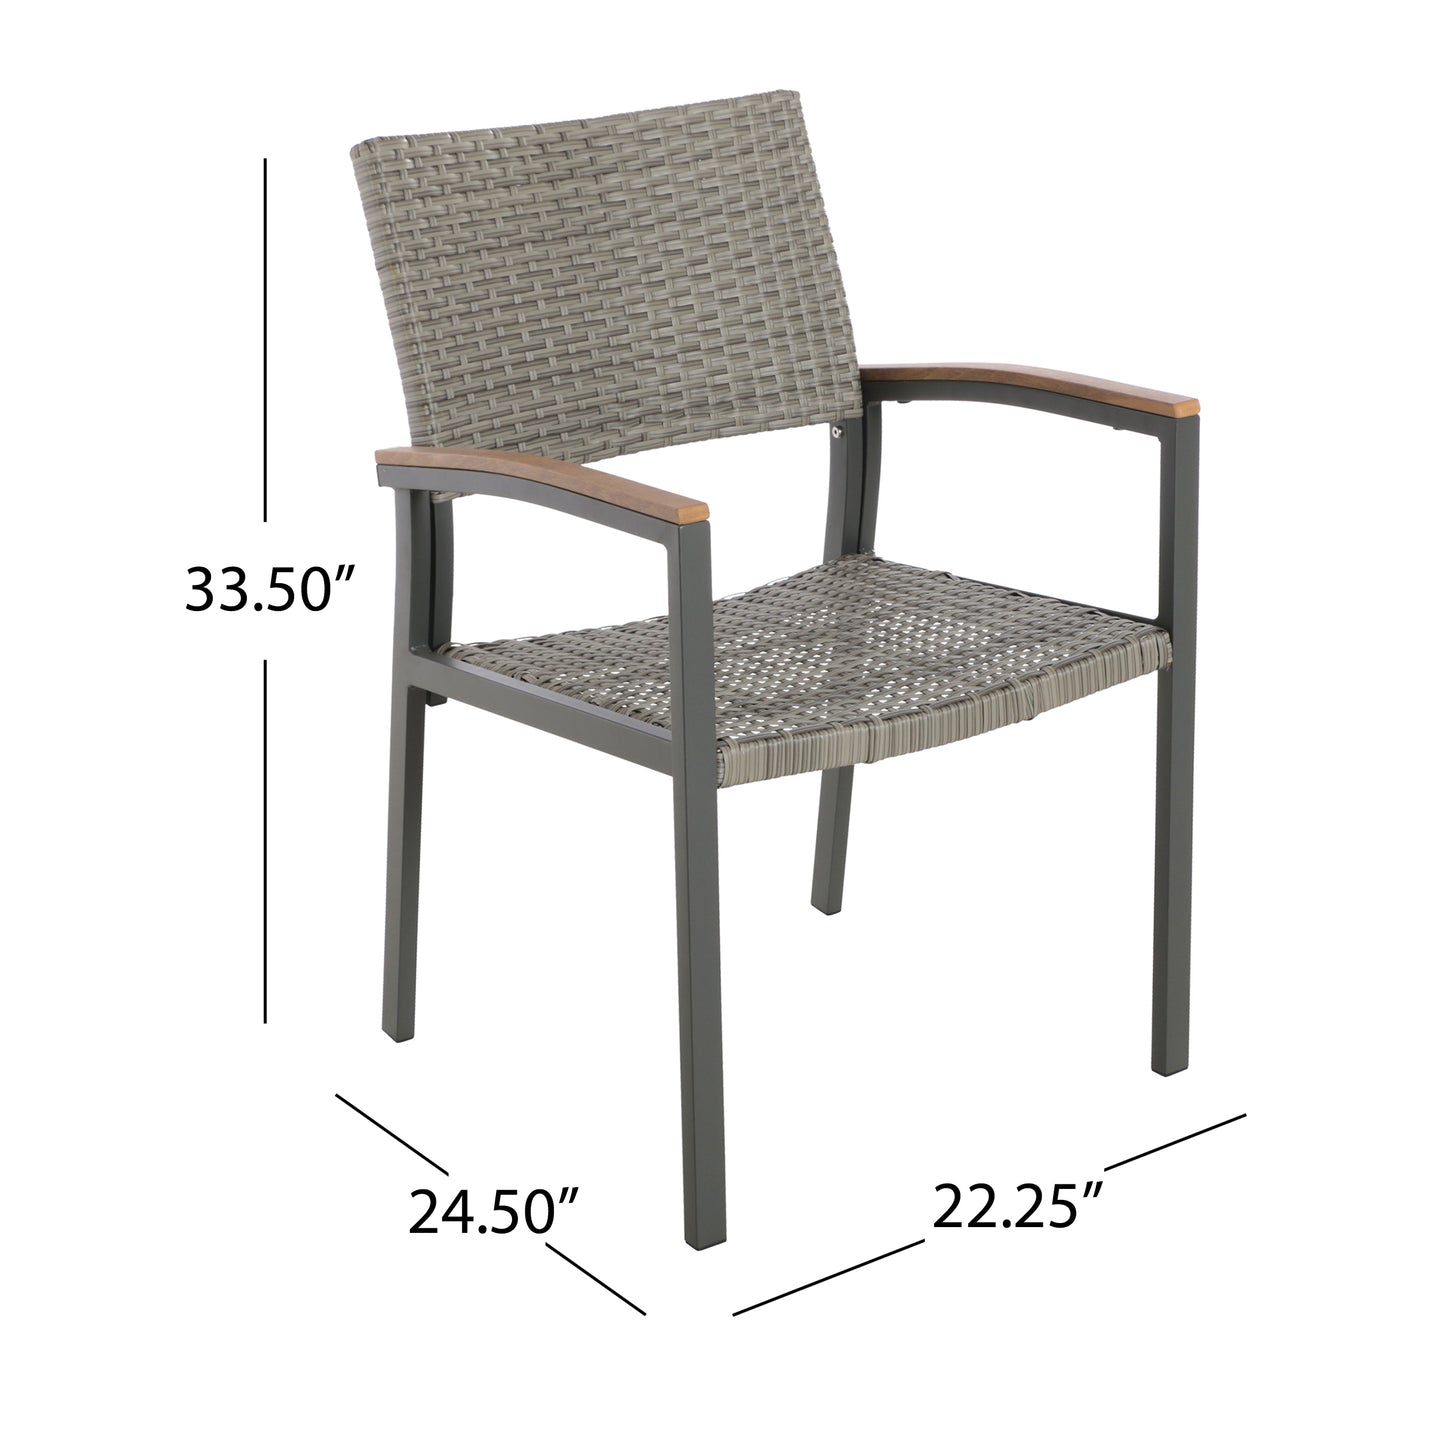 Swarthmore Outdoor Aluminum Dining Chairs with Faux Wood Accents